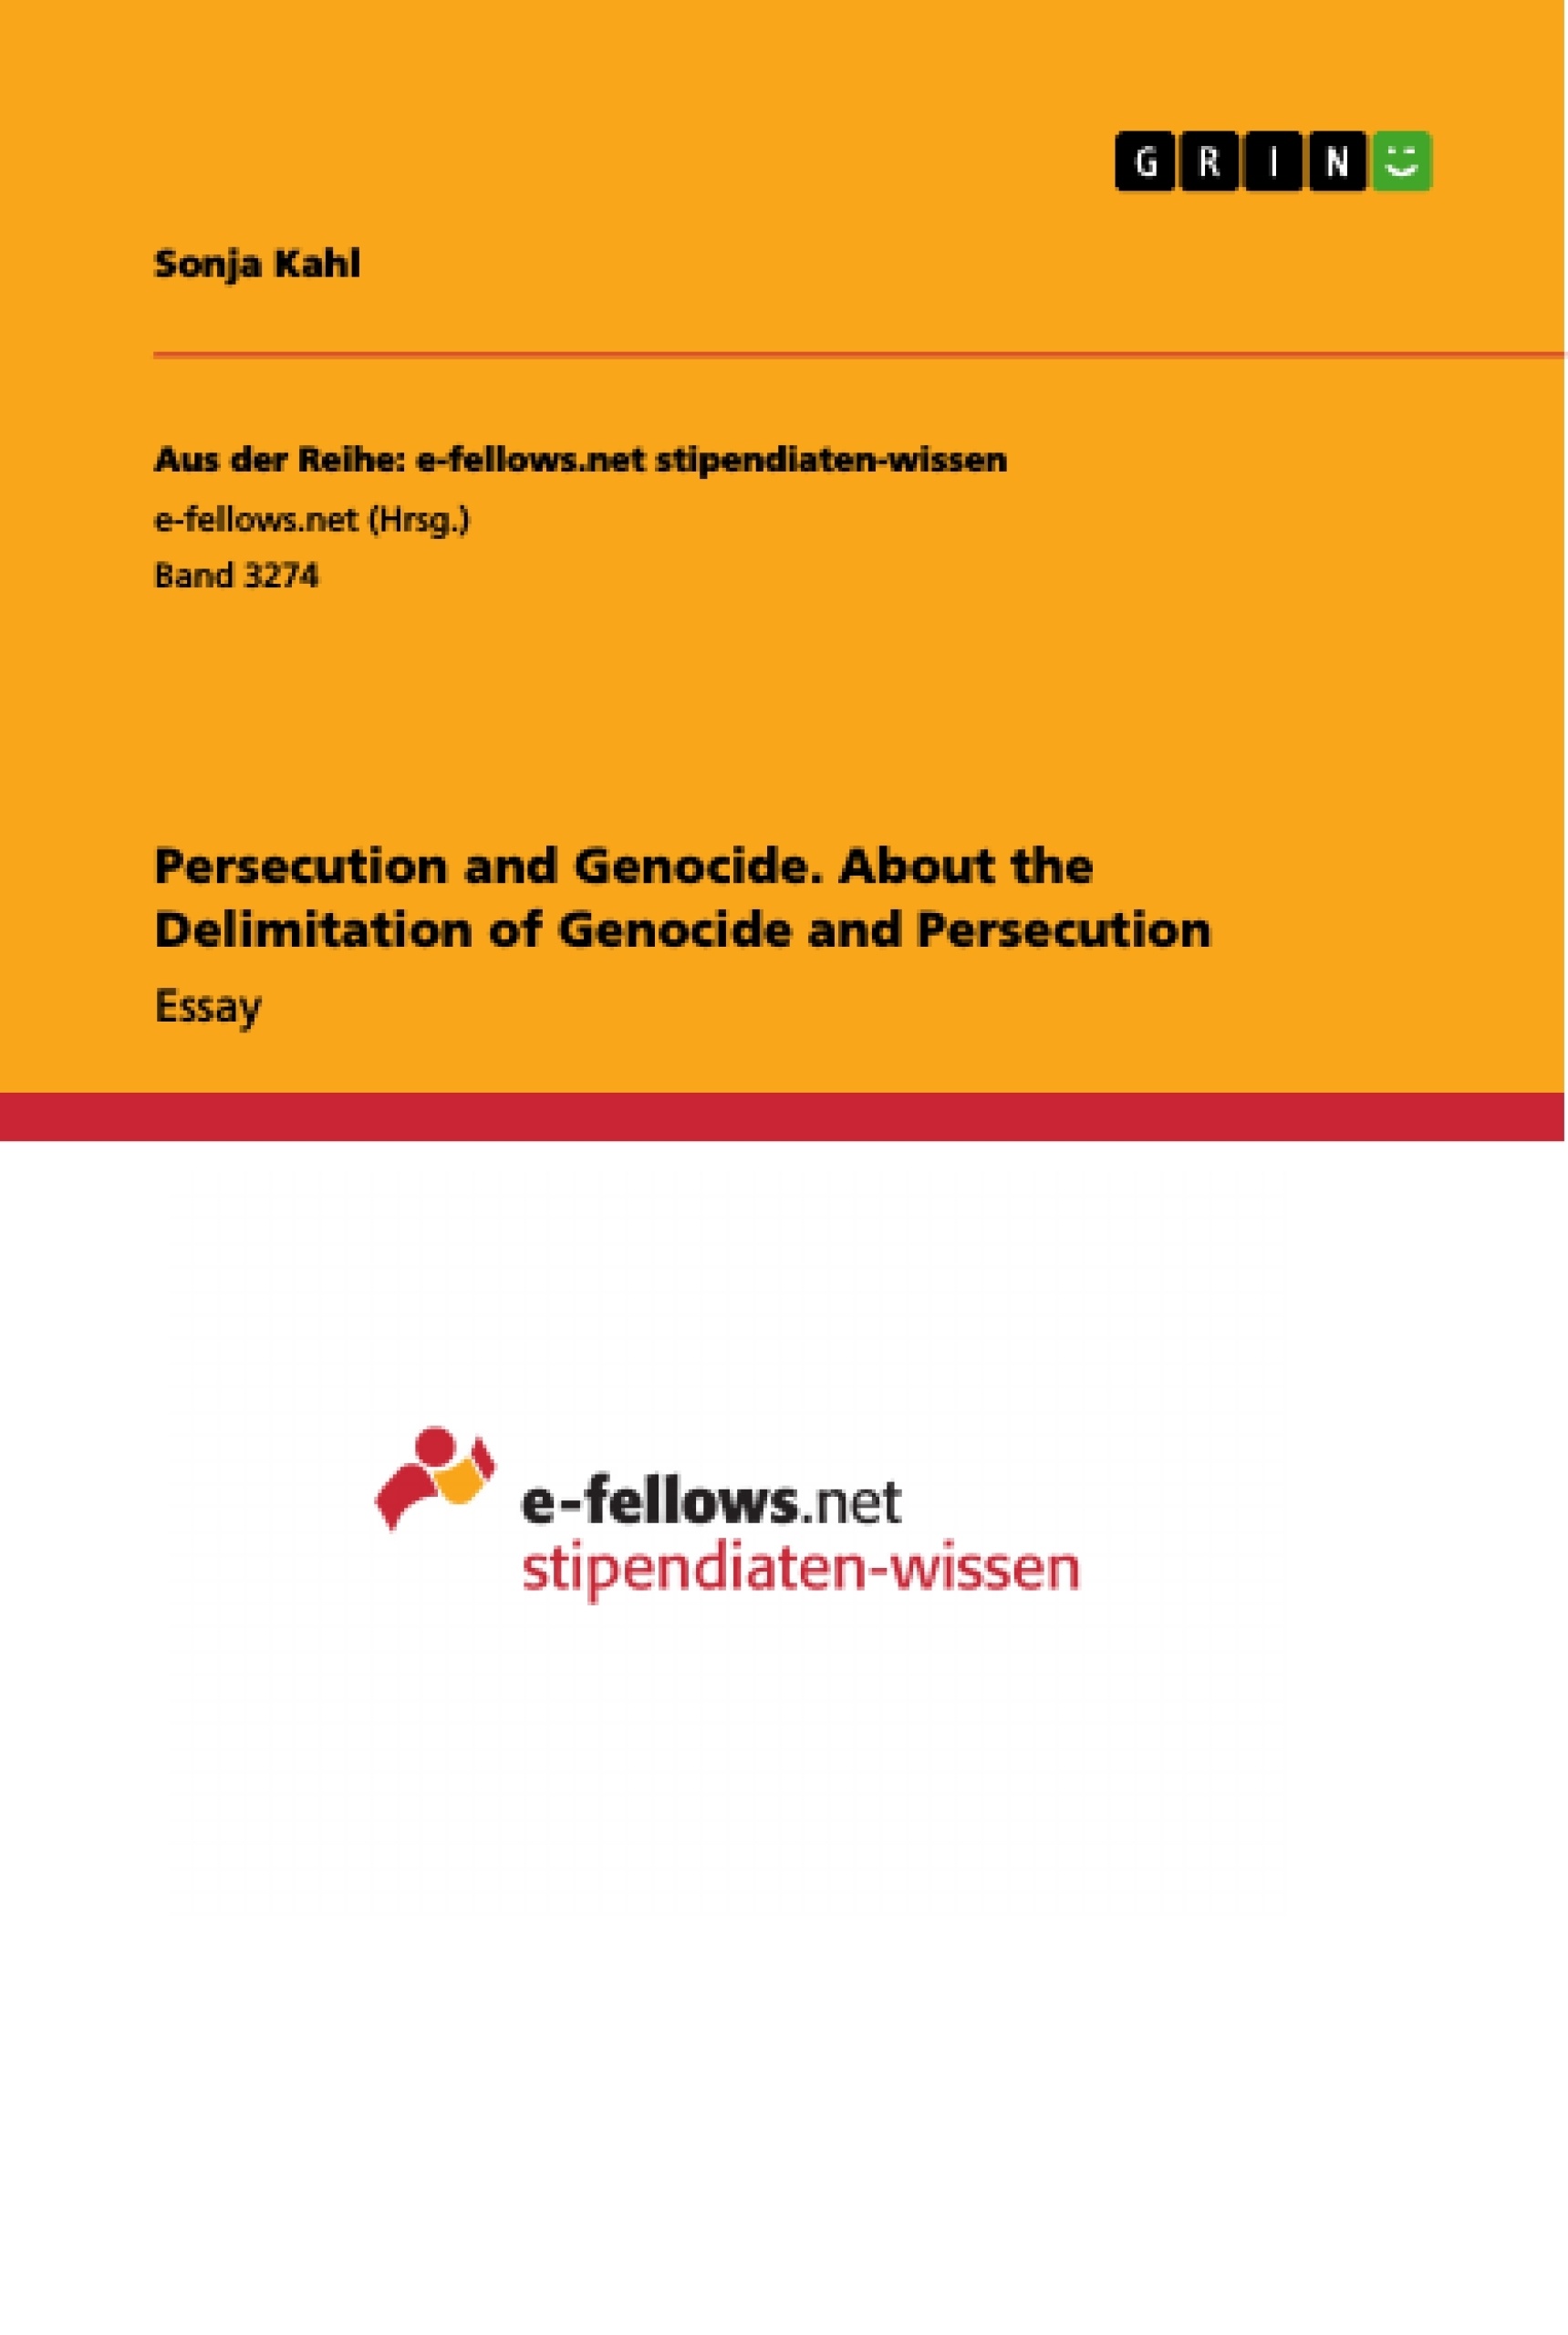 Title: Persecution and Genocide. About the Delimitation of Genocide and Persecution